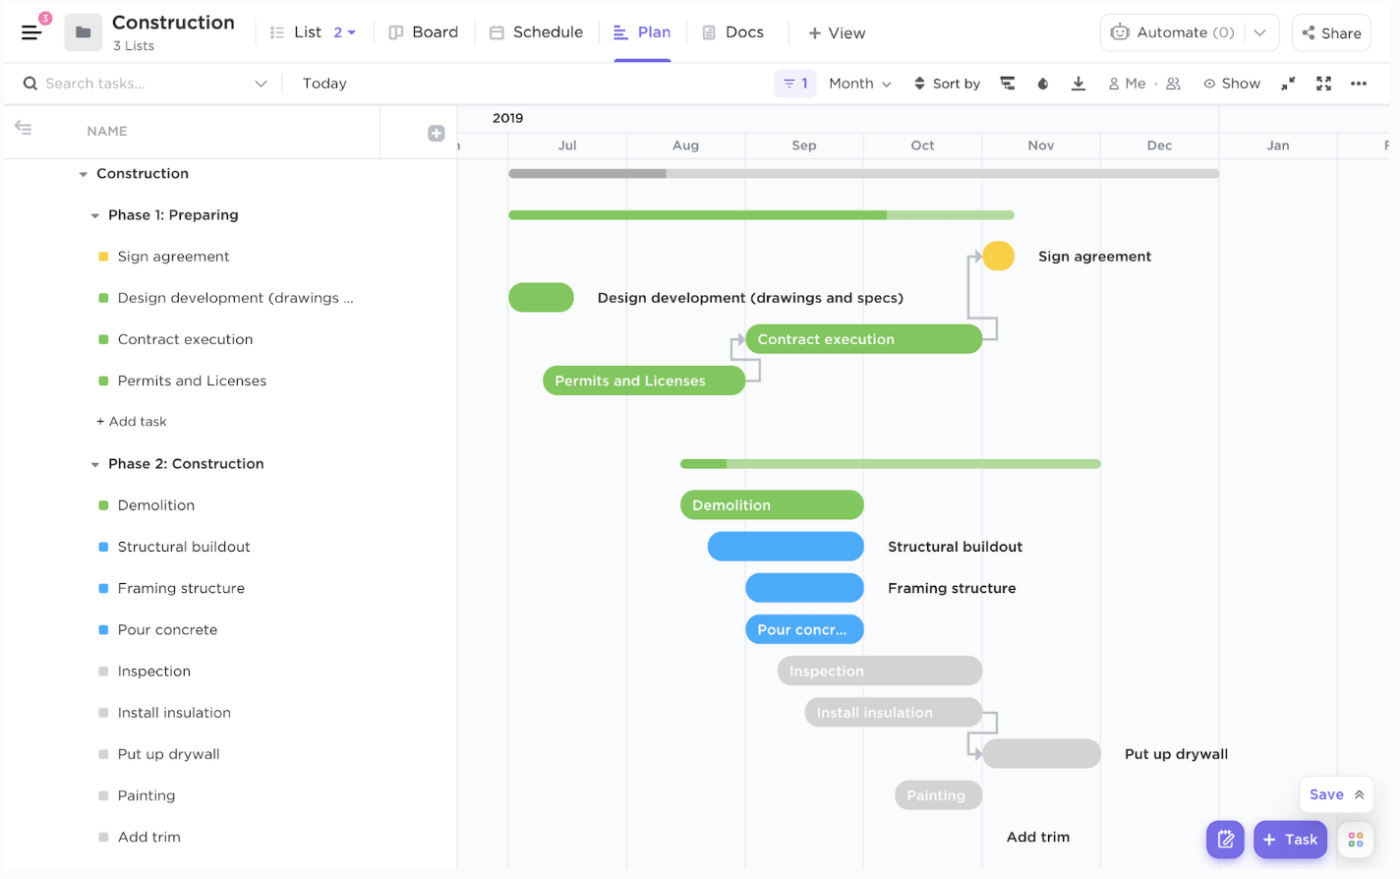 organize construction tasks and projects with clickup's gantt view 